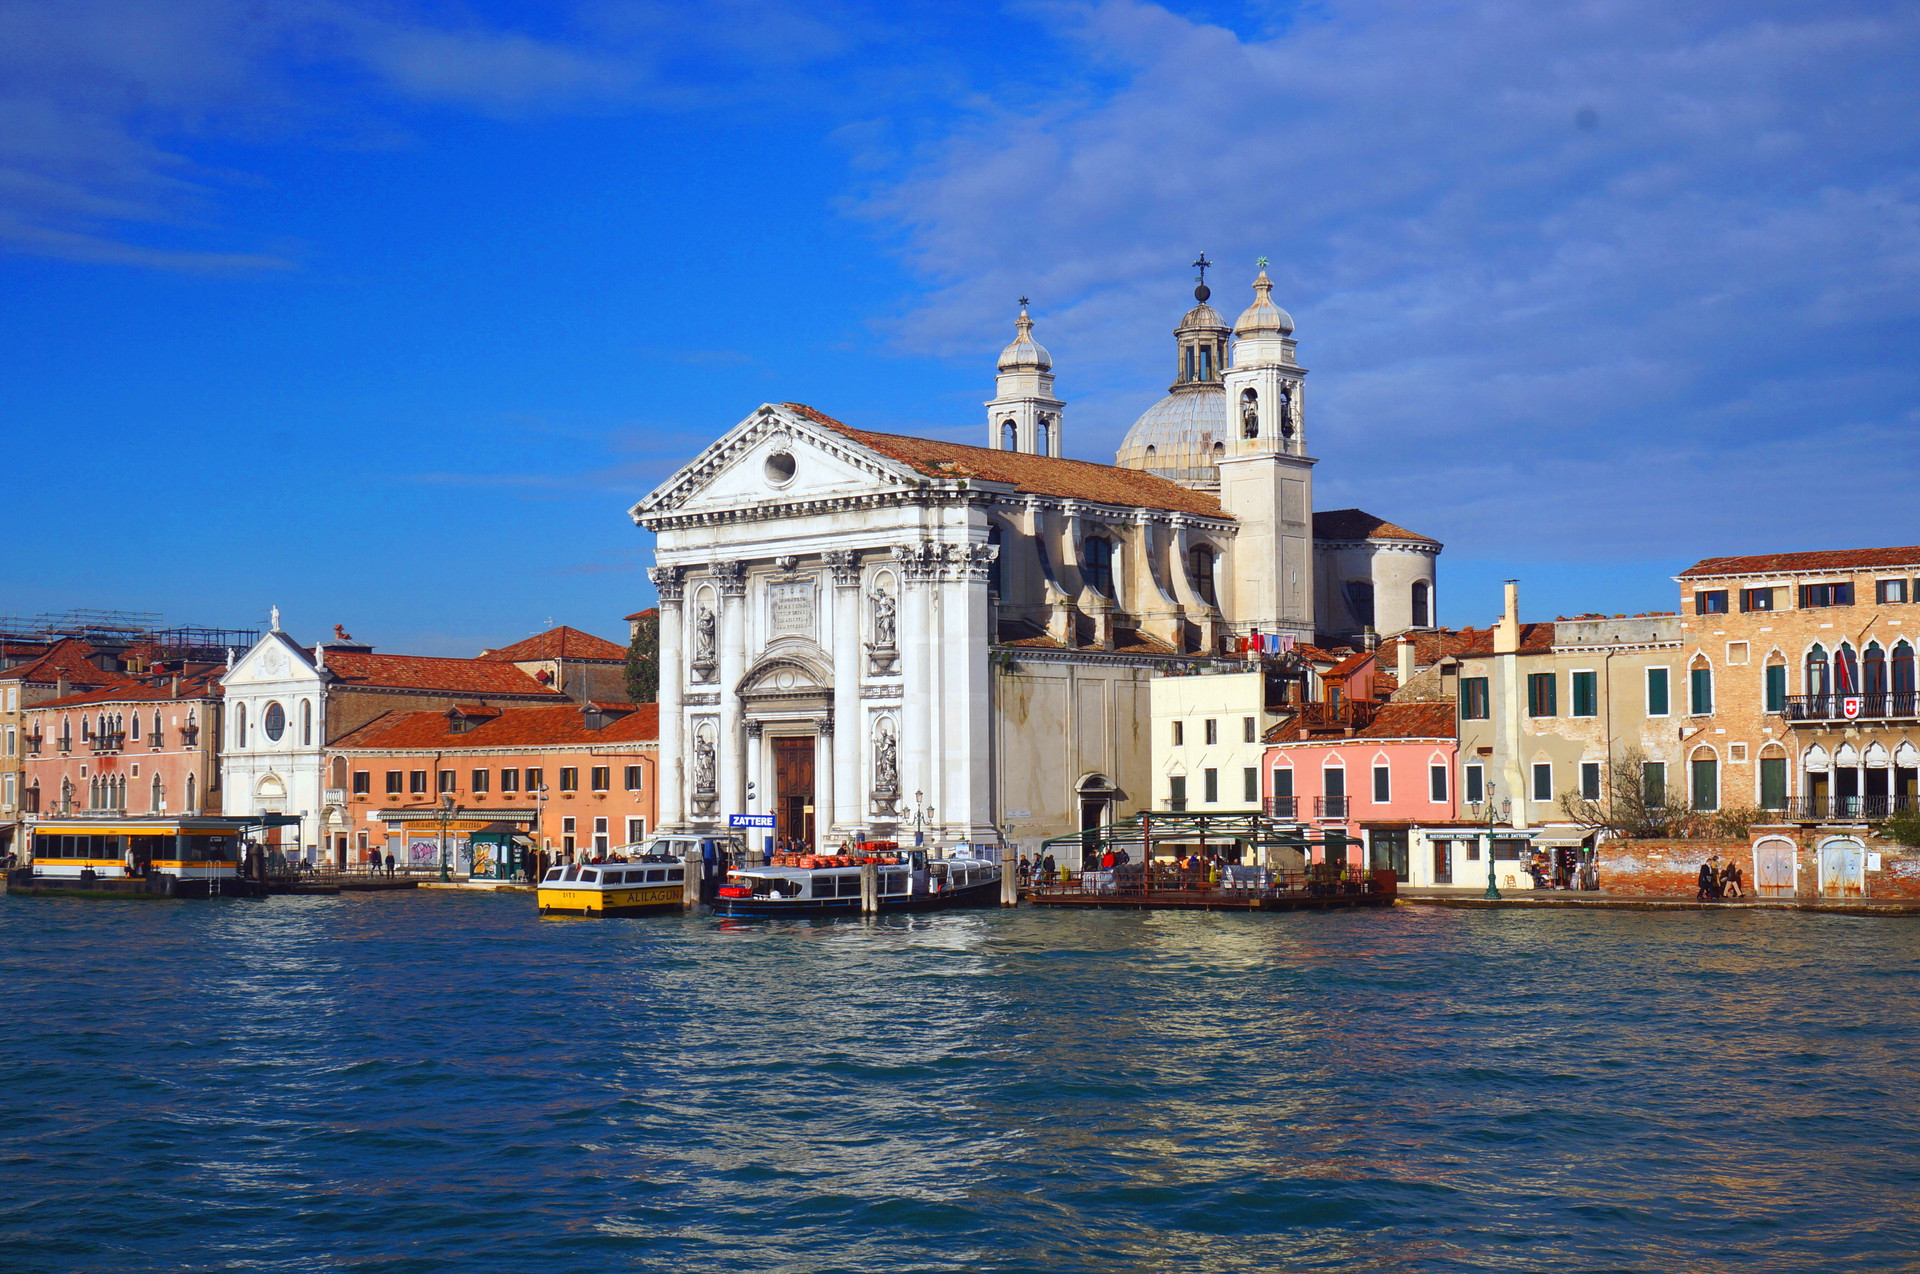 Free Images : venice, italy, architecture, canal, europe, city, travel ...